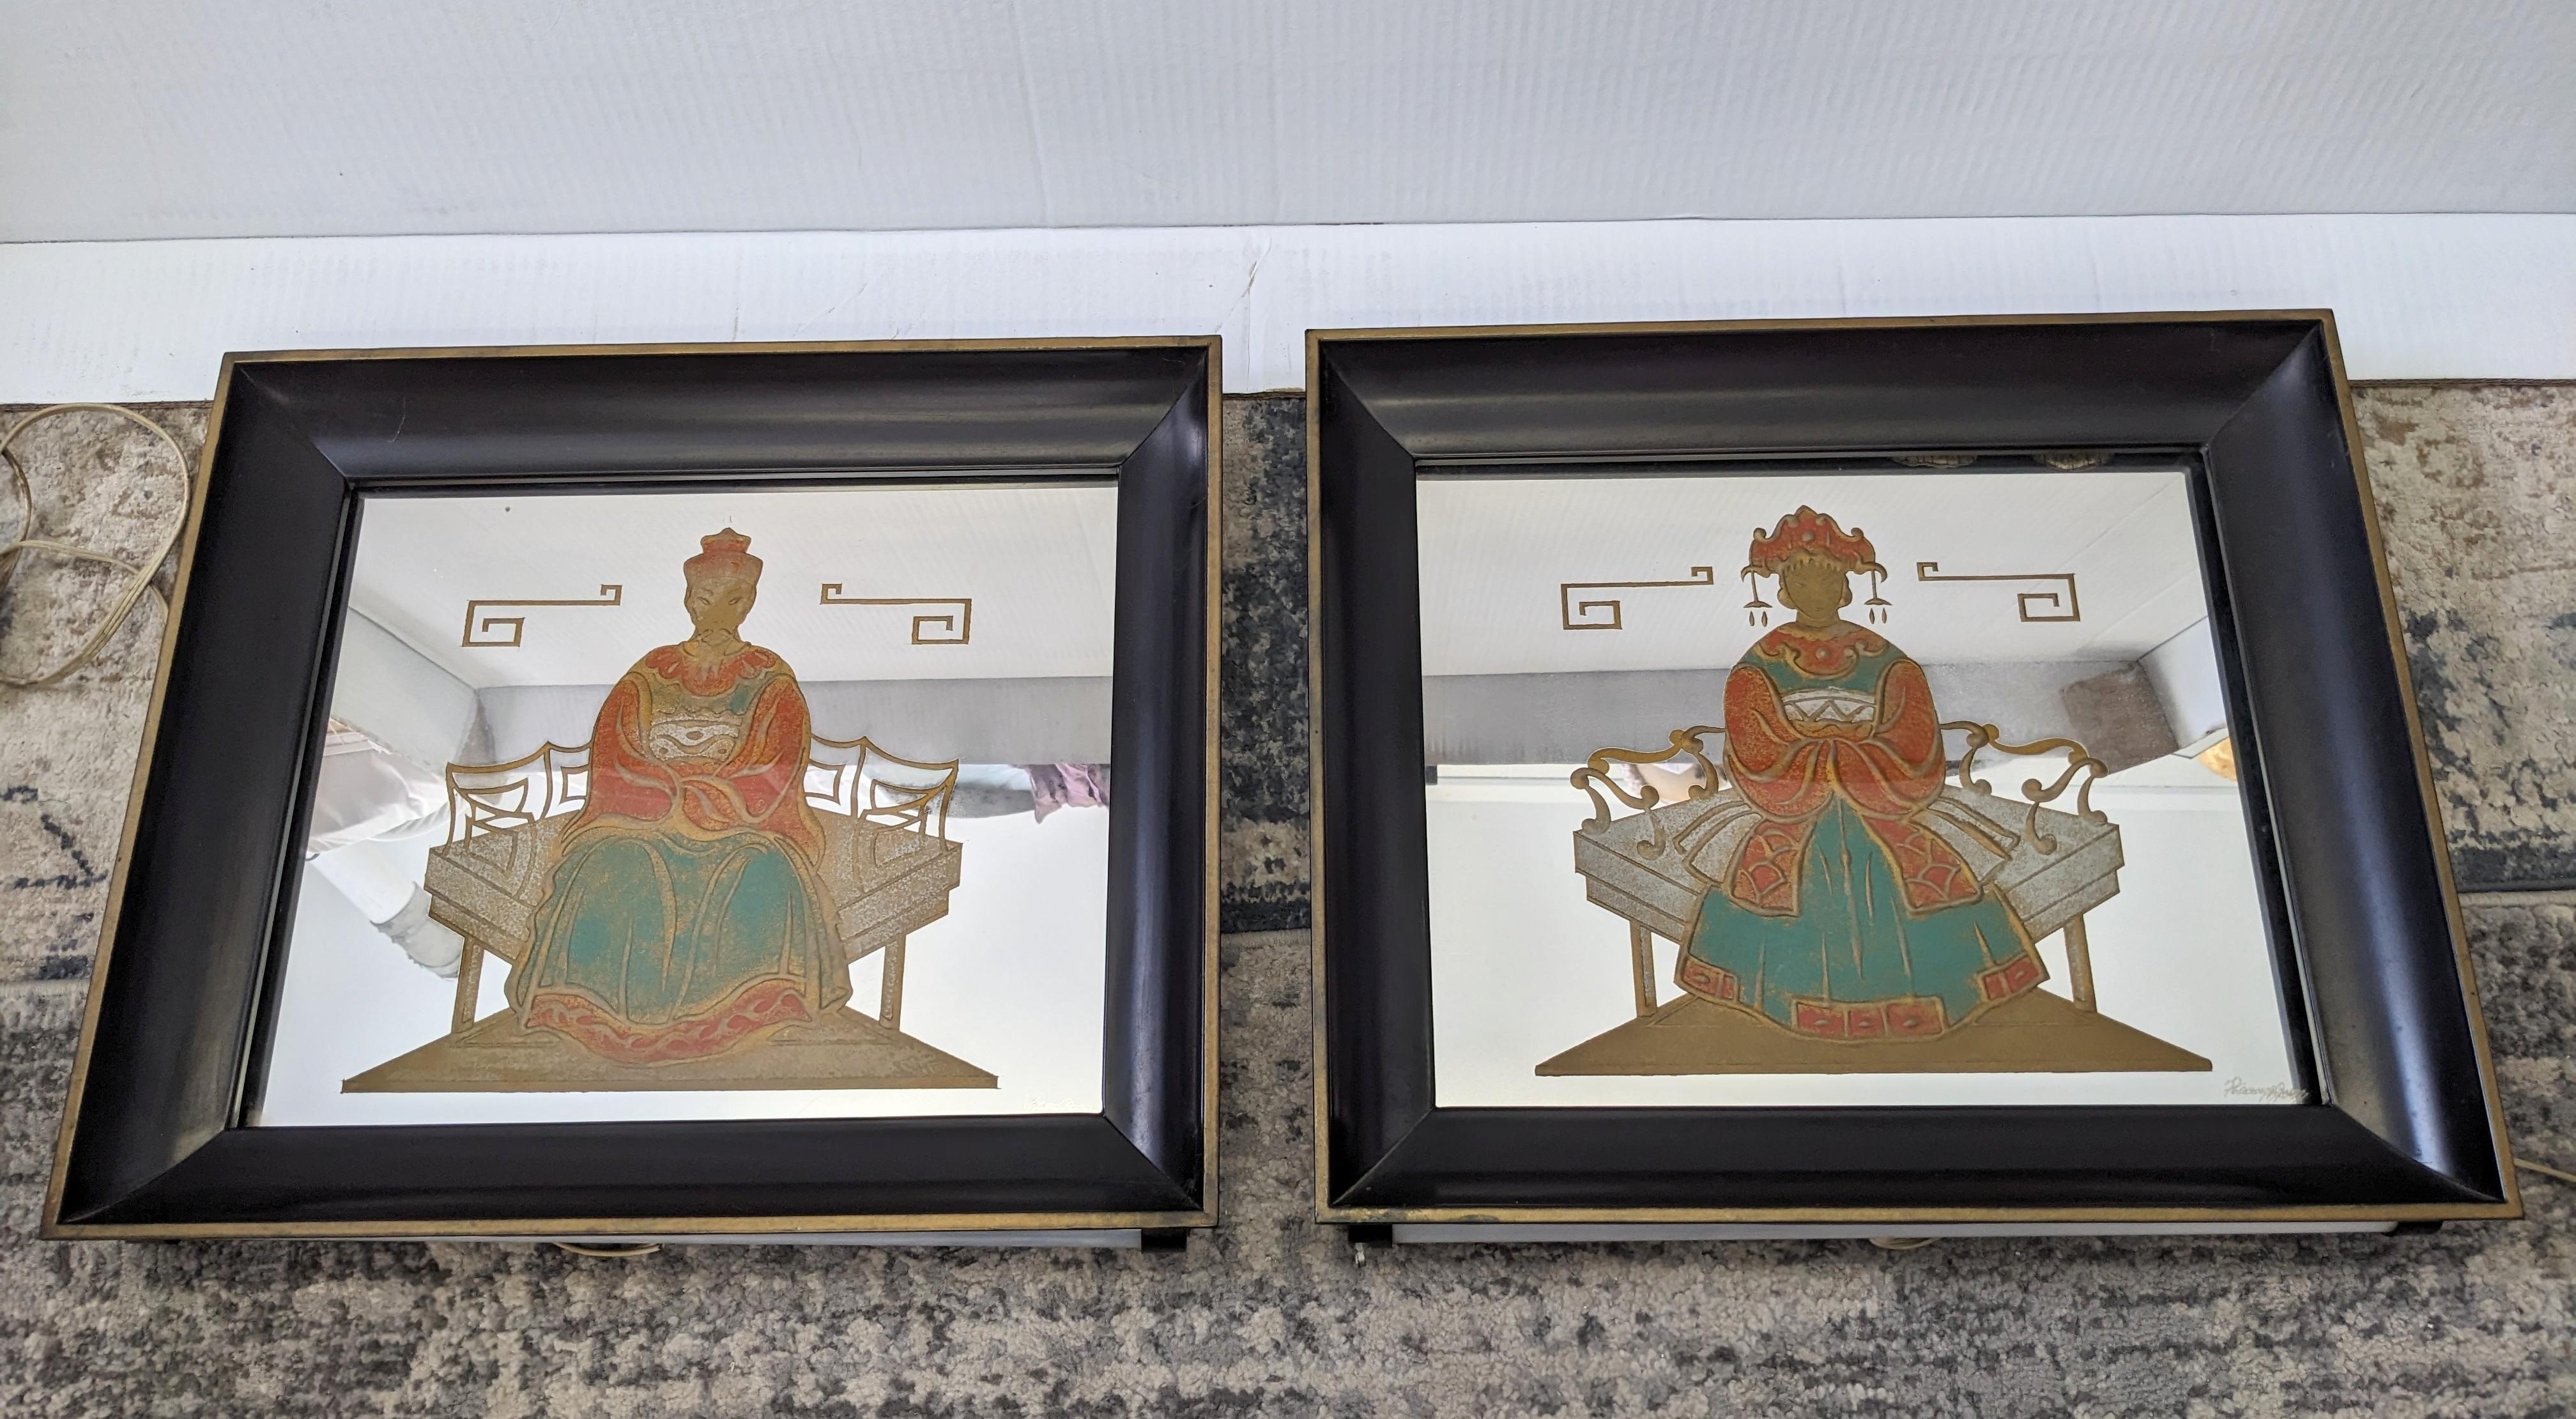 Pair of Mid Century Chinoiserie Illuminated Verre Eglomise Frames from the 1940's. A pair of Asian Nobles are beautifully reverse painted on mirror and set into a dimensional frame. There are fluorescent tube lights on top and bottom edge of each